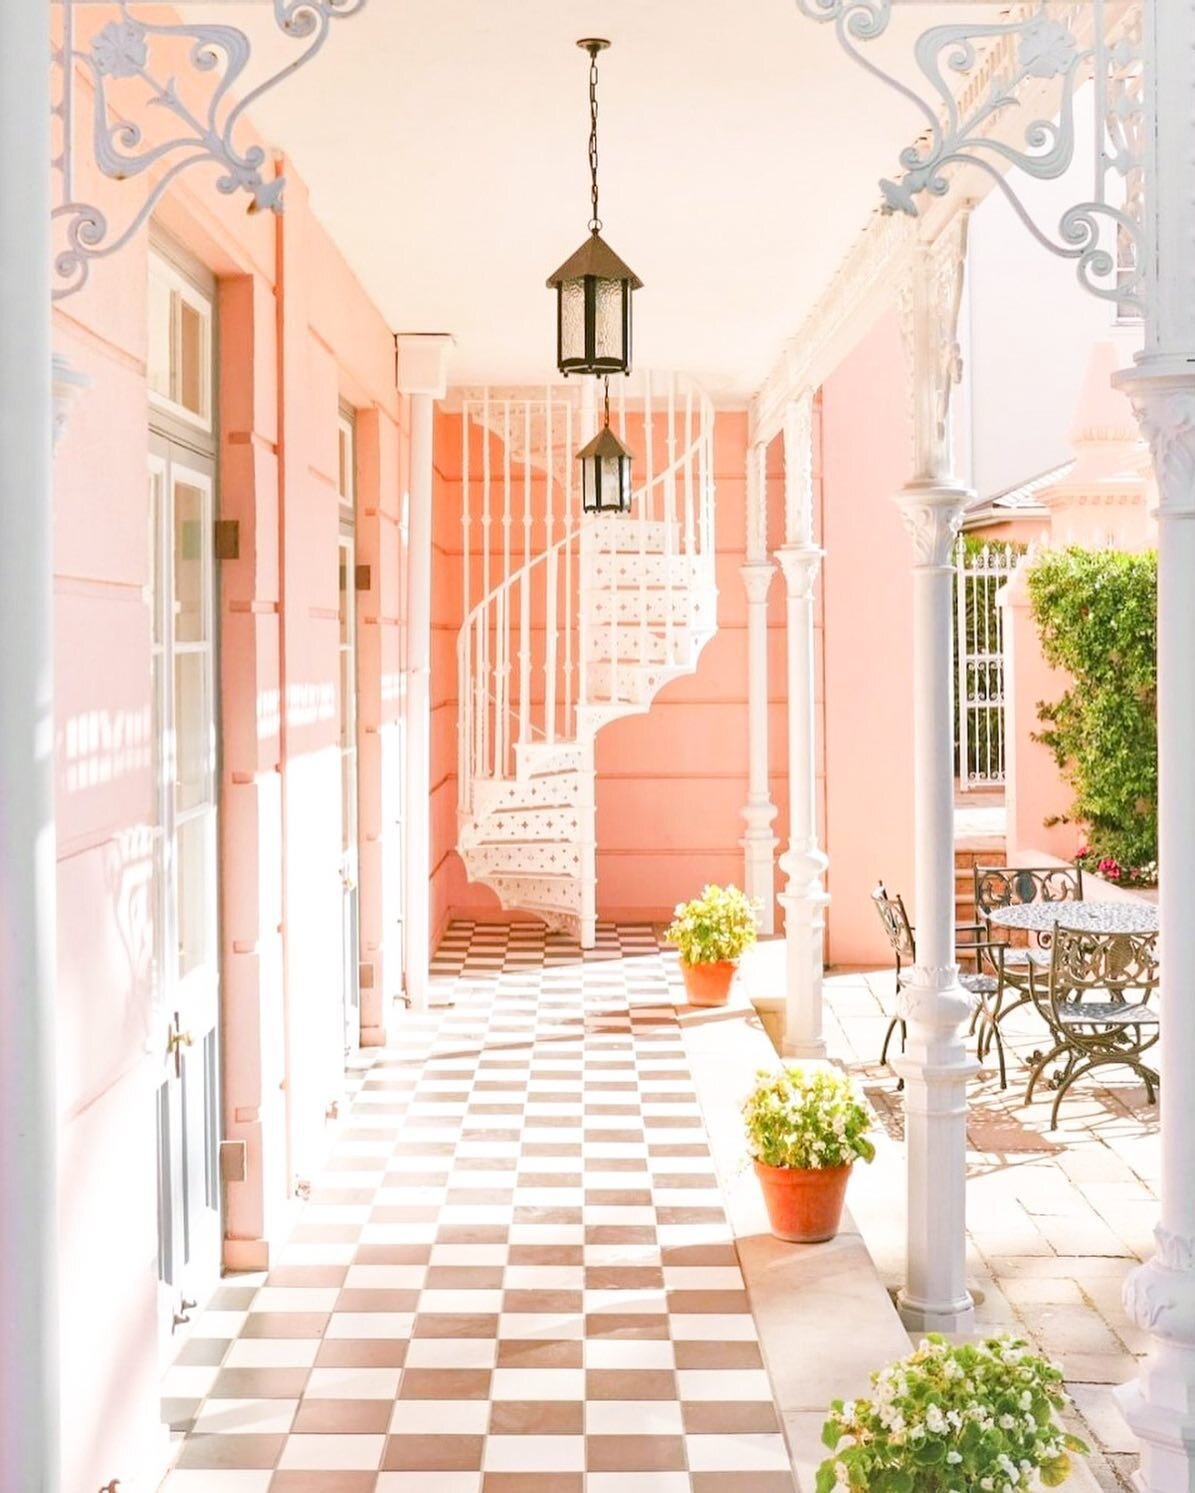 ⁠This hotel has all the Valentine's Day vibes ... light pink hues, checkered floors, and the magic of a bygone era!⁠⁠
⁠⁠
Want to surprise your special someone with a getaway for the long holiday weekend? We got you!⁠⁠
⁠⁠
We are sharing a few statesid